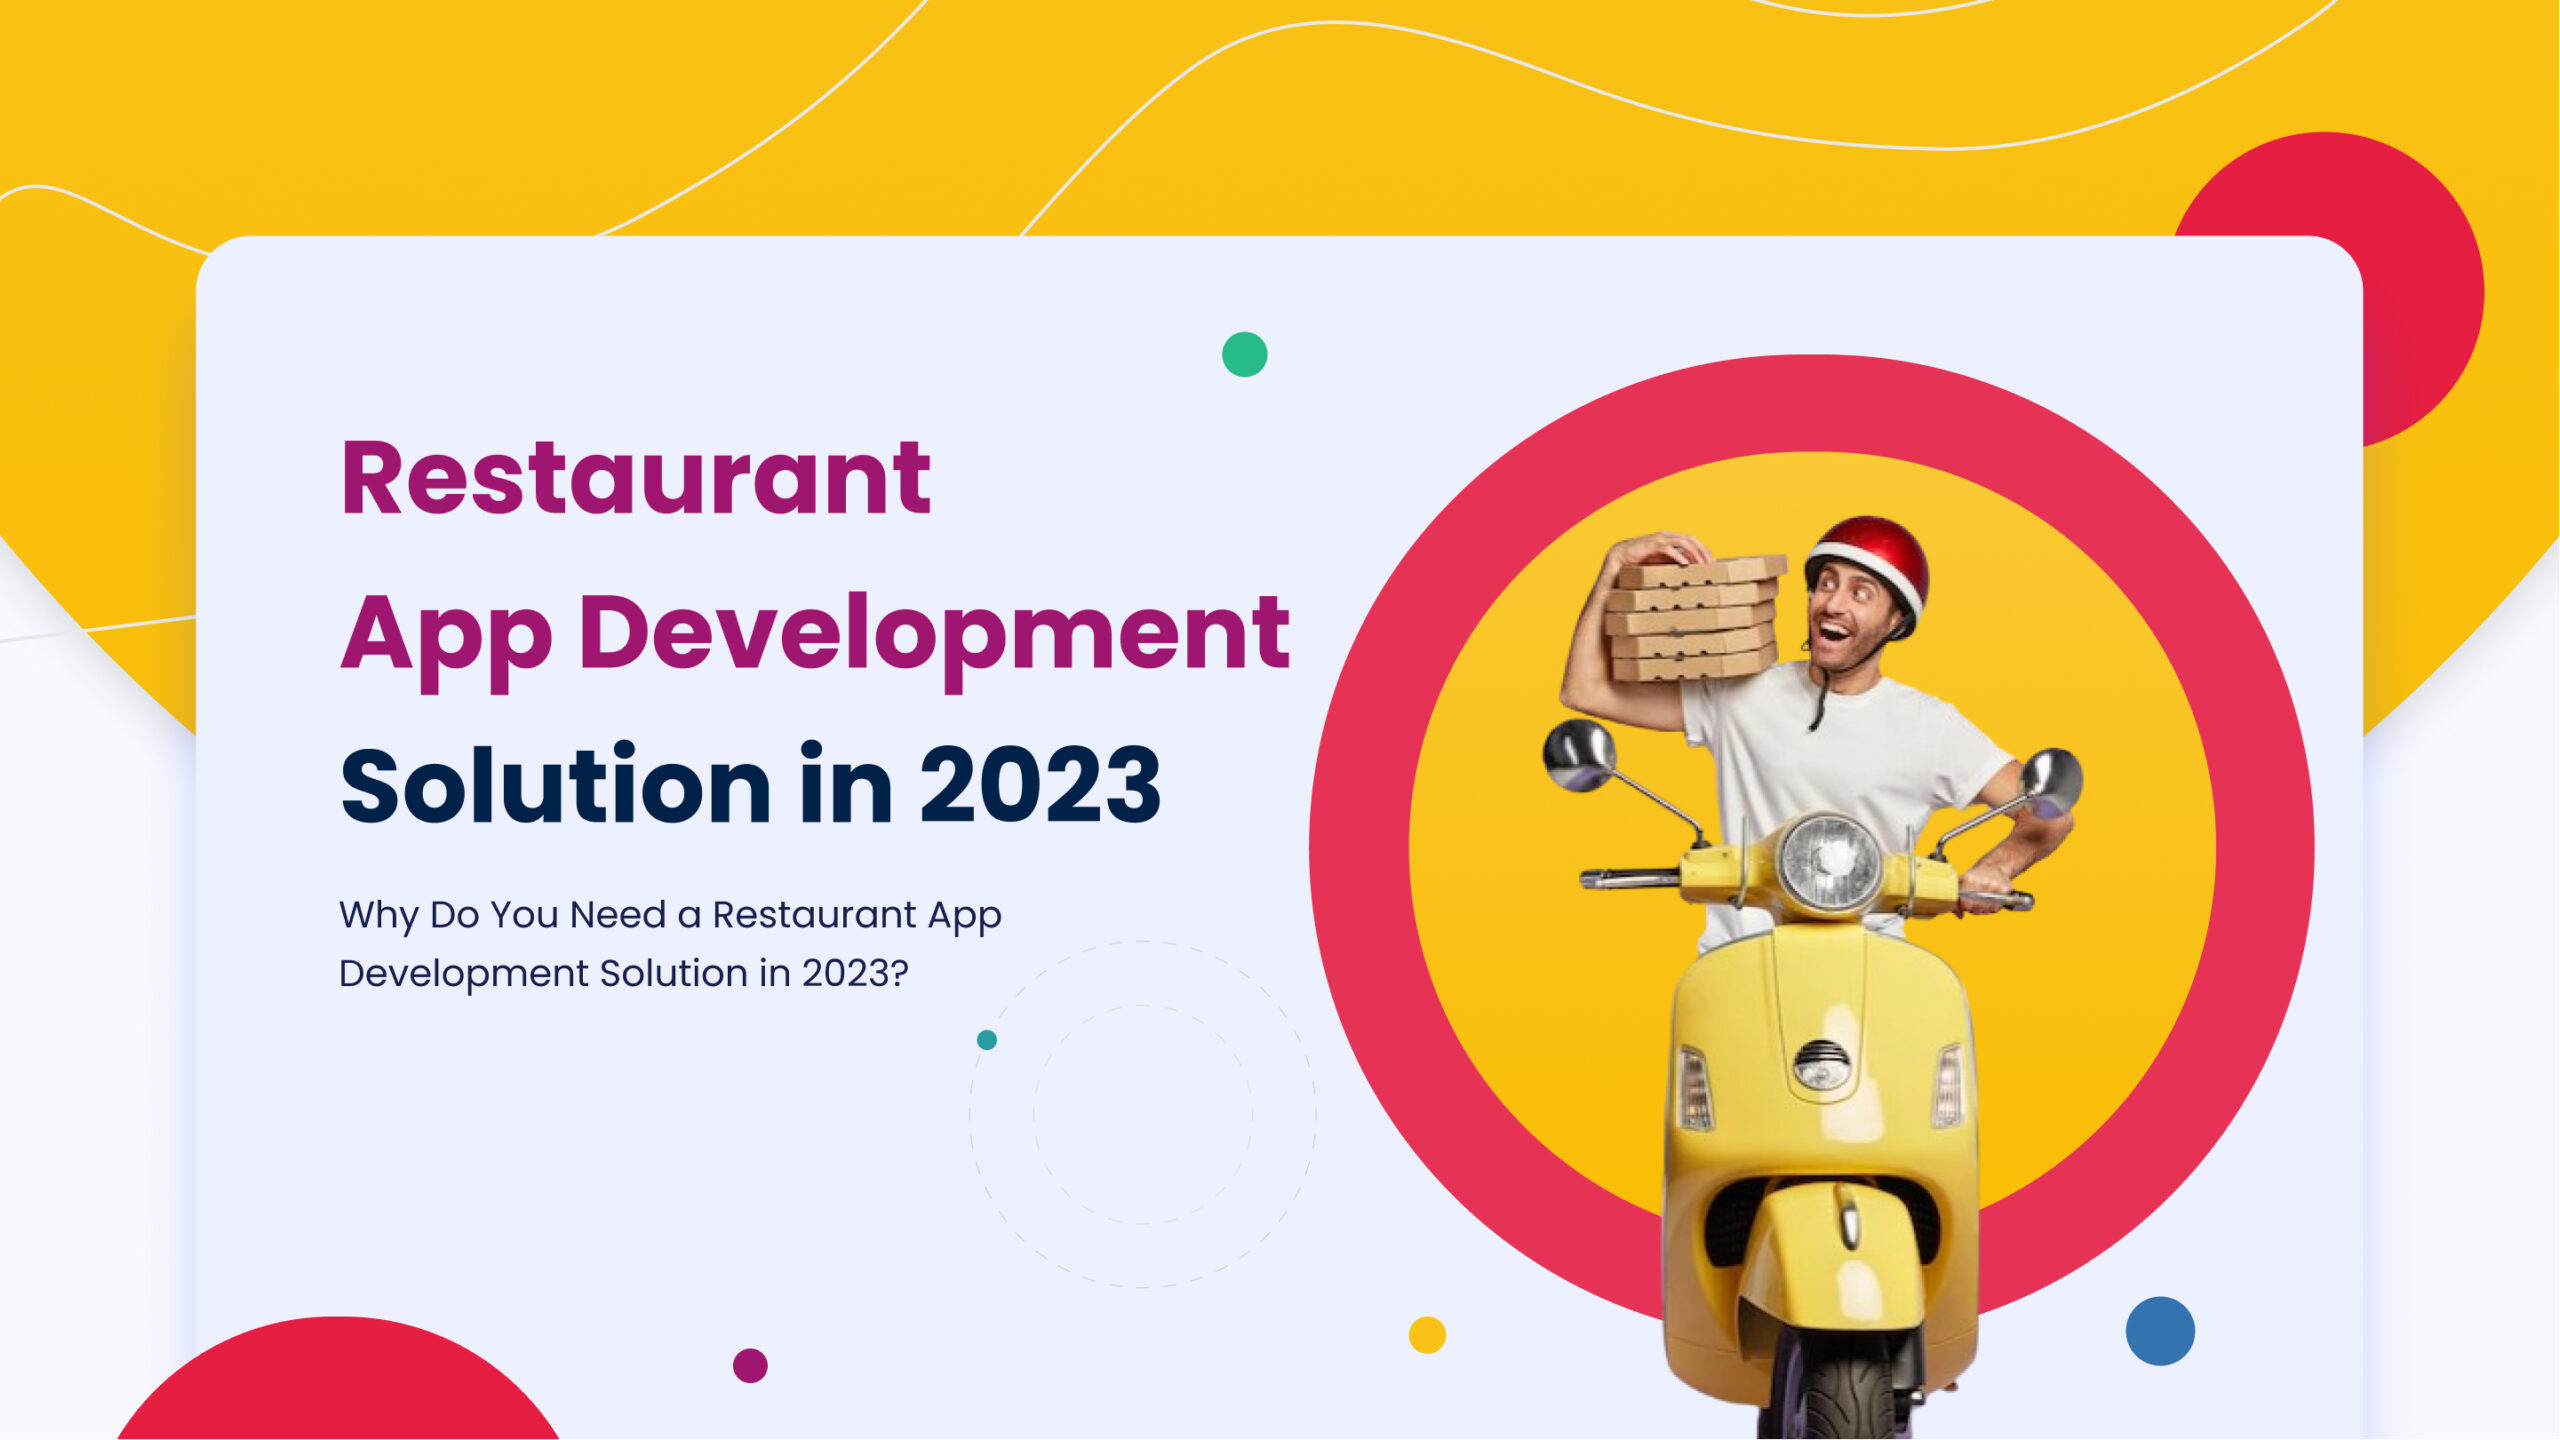 Why Do You Need a Restaurant App Development Solution in 2023?